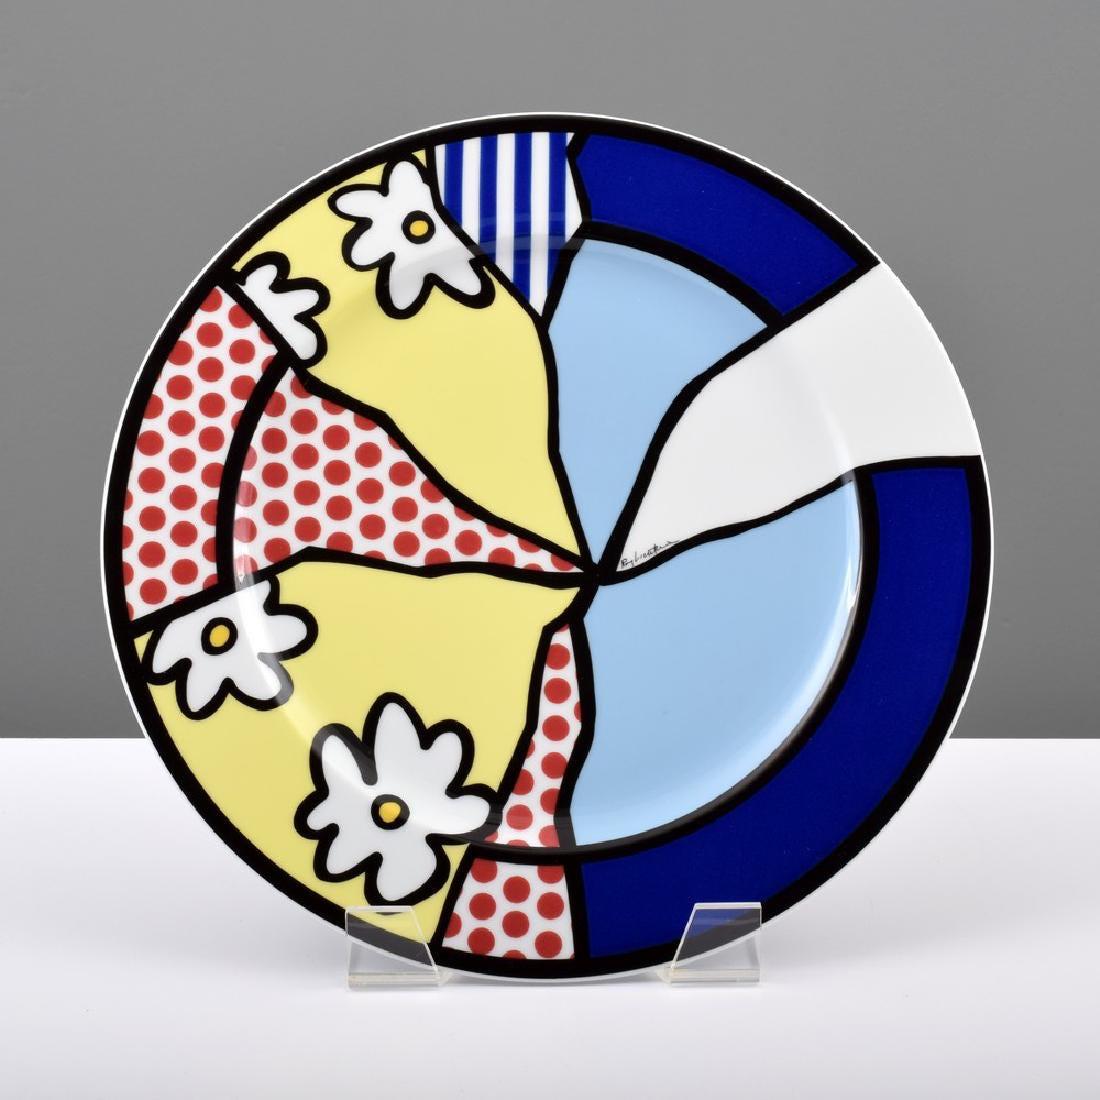 Published by Rosenthal, Germany in 1990, this exquisite glazed porcelain plate is from an image created by Roy Lichtenstein.  The brilliantly colored plate, accompanied by its original box, is stamp signed (recto) and inscribed with the edition